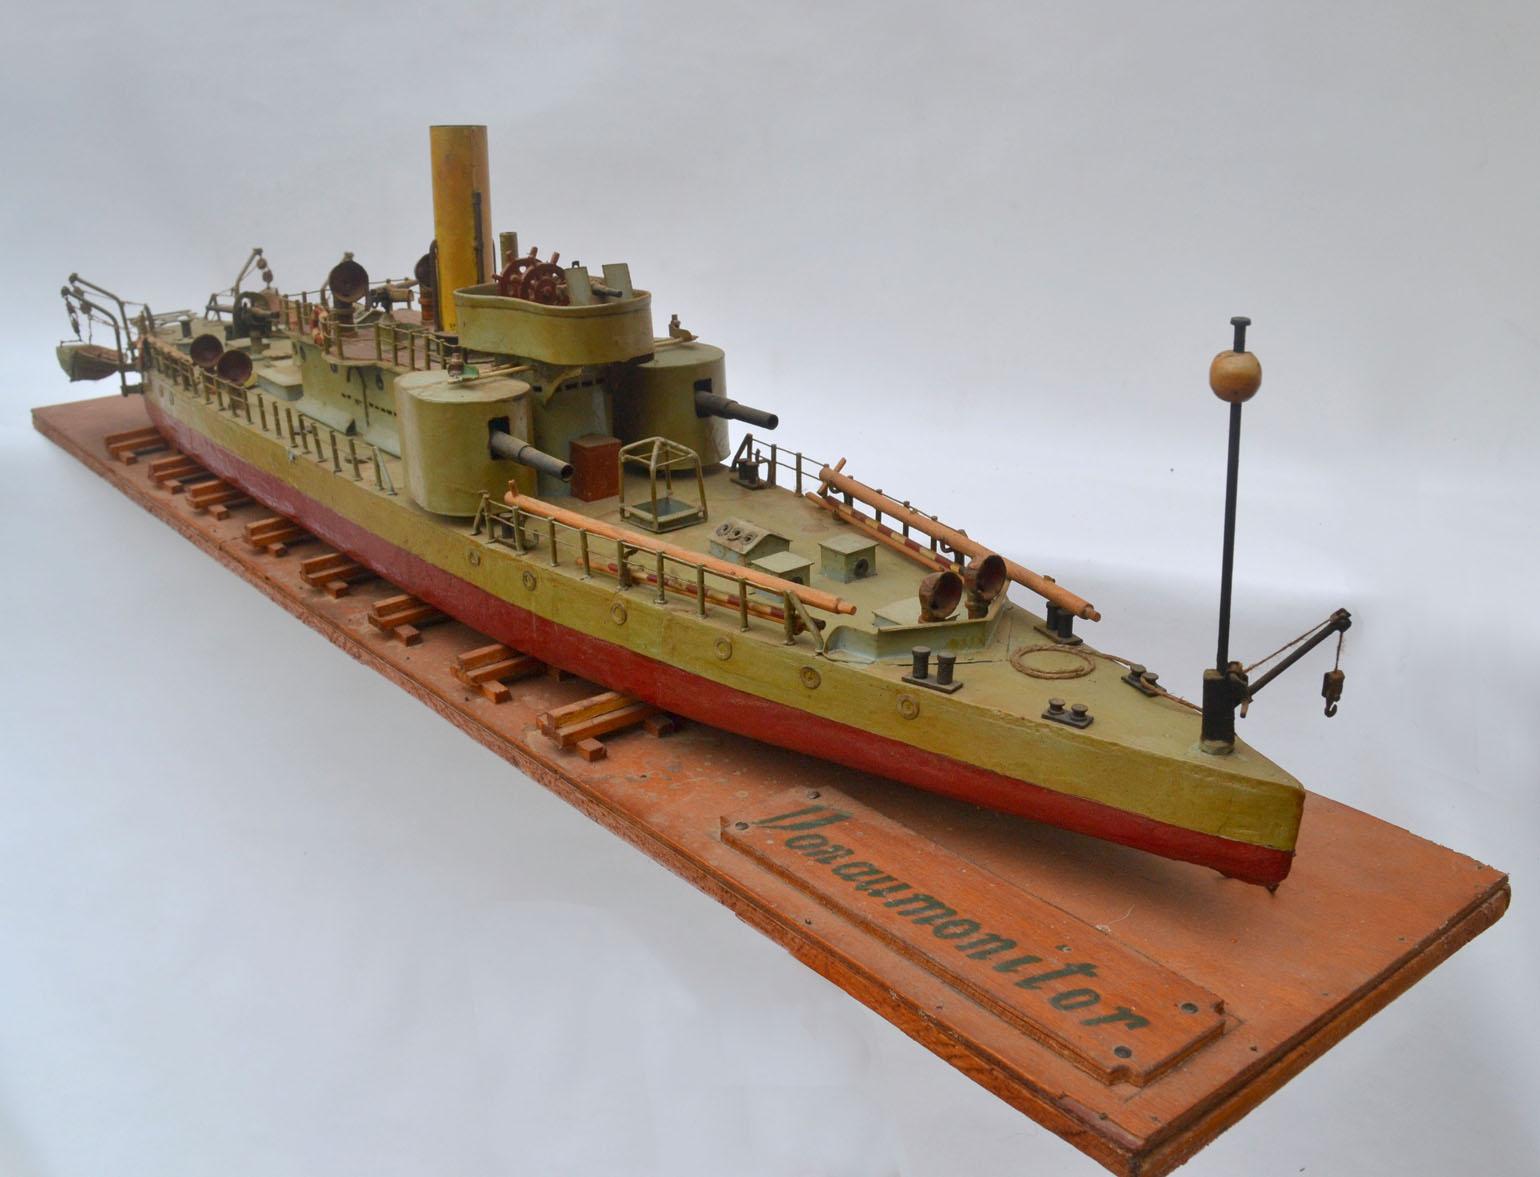 A fine shipyard model of an early Torpedo ship. This model of a Torpedo war boat monitored the Donau river around the late 19th century to the early 20th century. It was handcrafted early to mid-20th century from East Germany or Russia. This